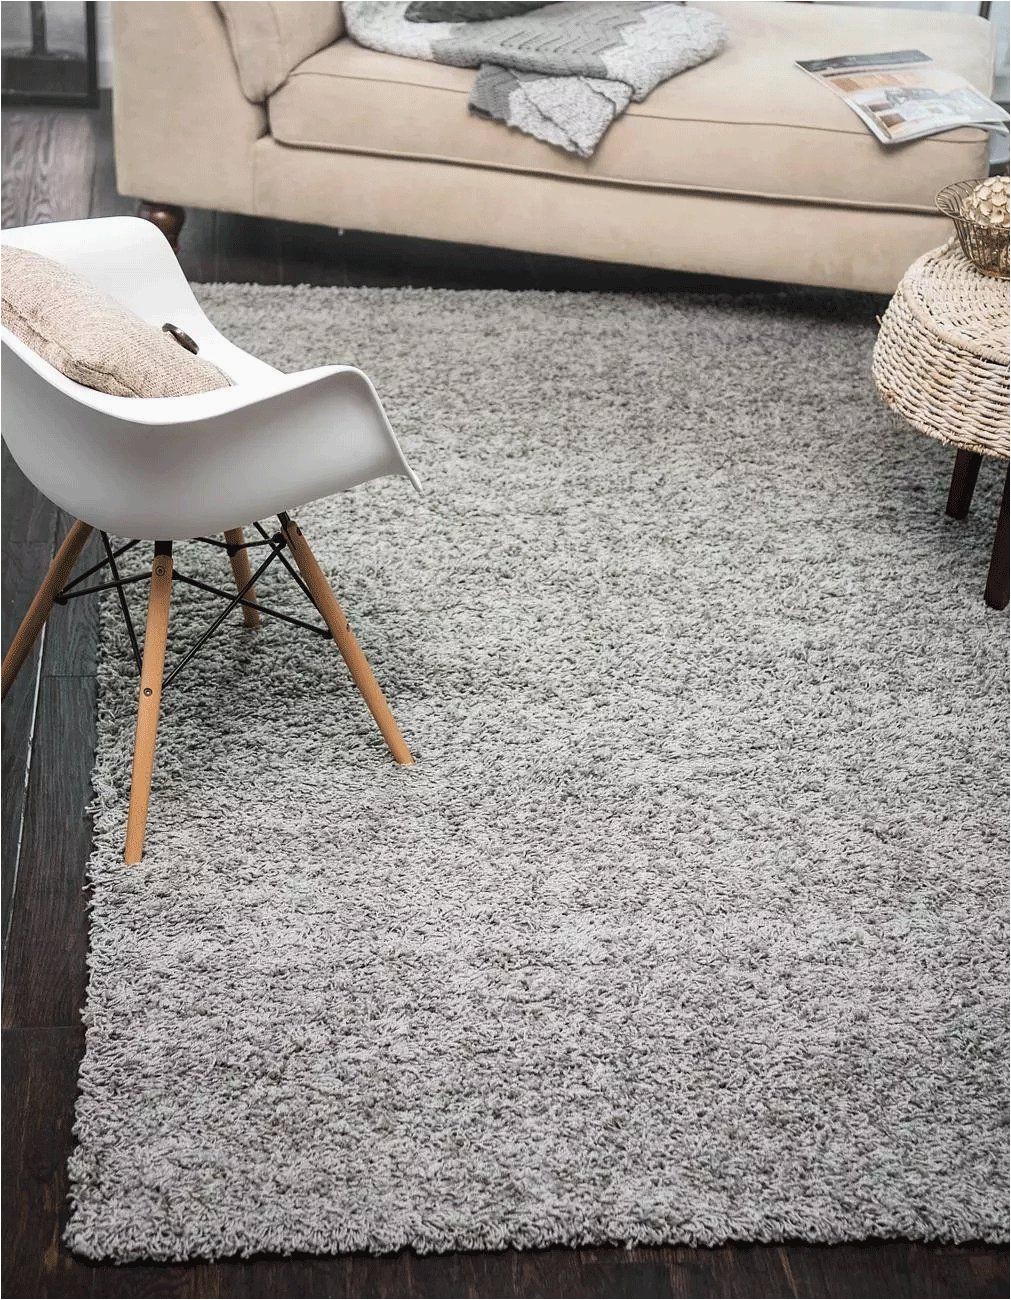 Solid Color area Rugs 9×12 $59 A2z Rug Cozy Shaggy Collection 5×8 Feet solid area